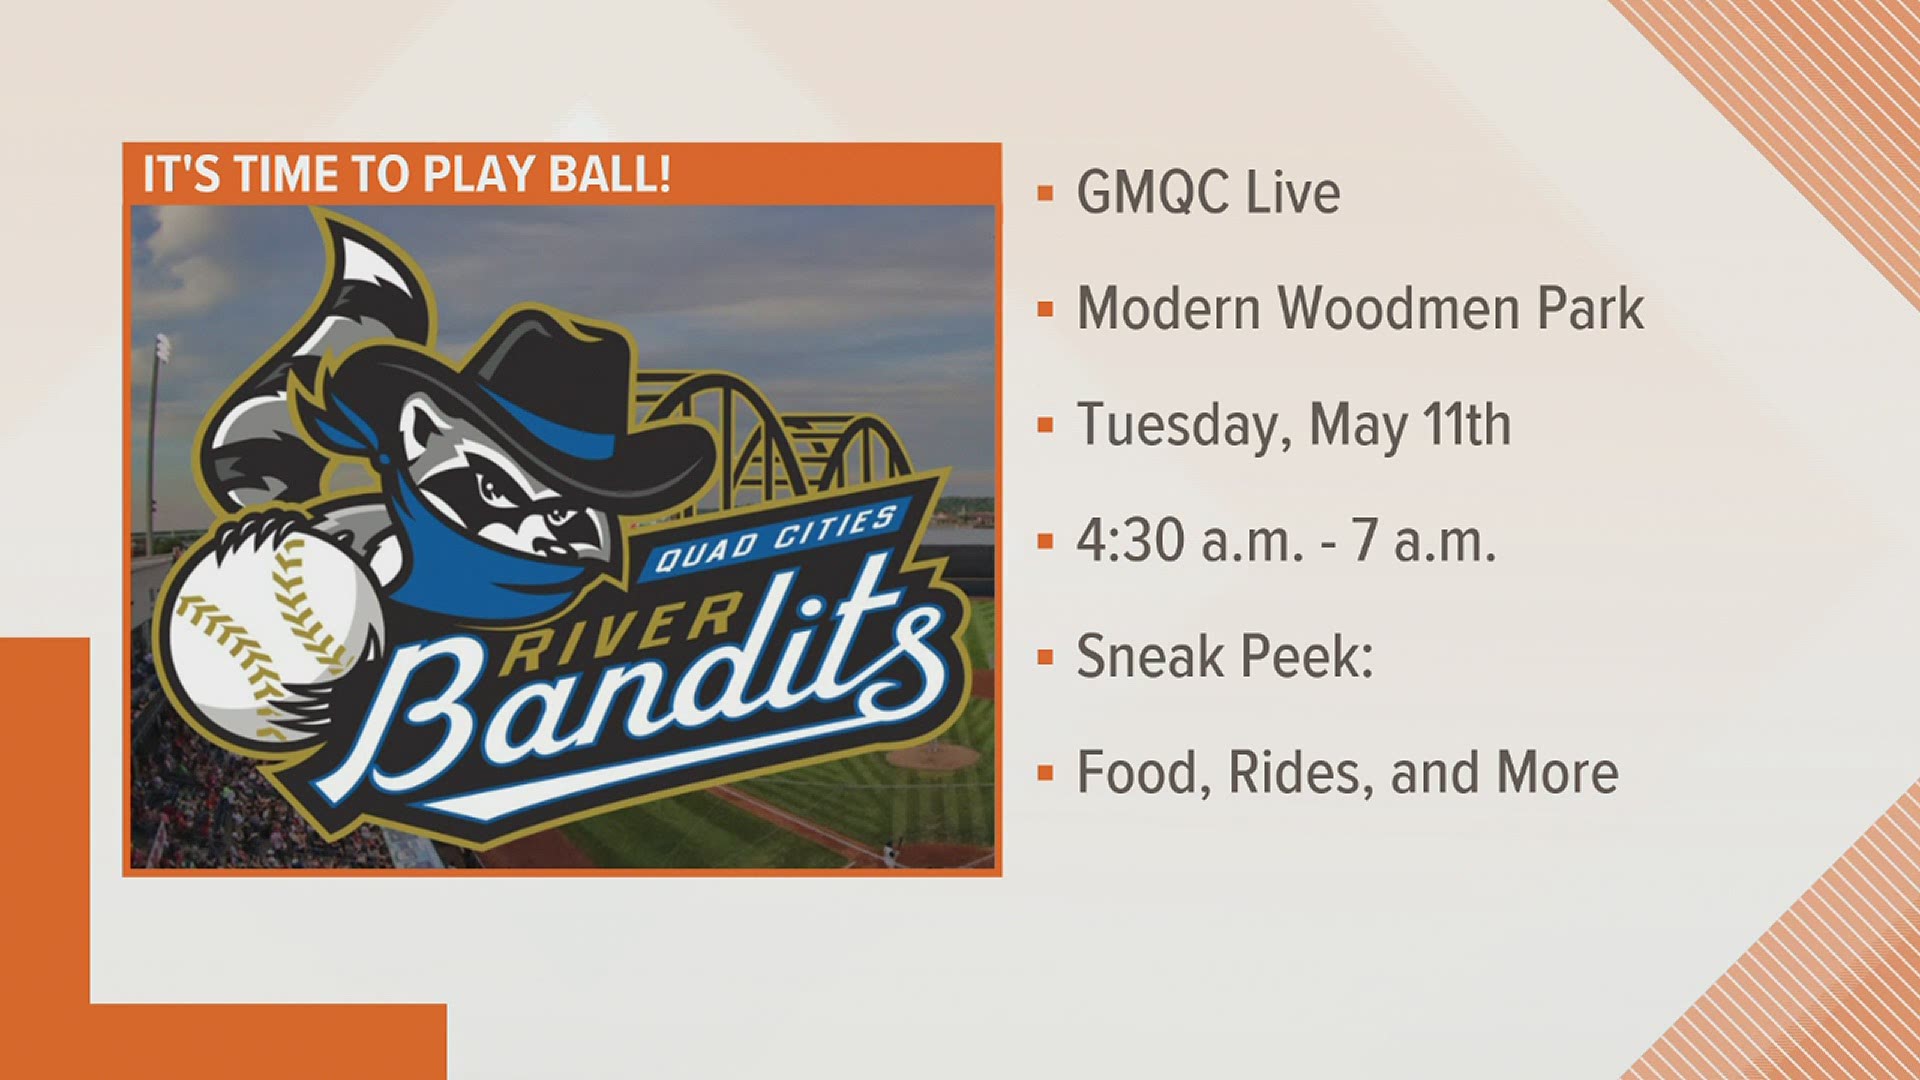 The morning show will be live from the ballpark Tuesday, May 11th.